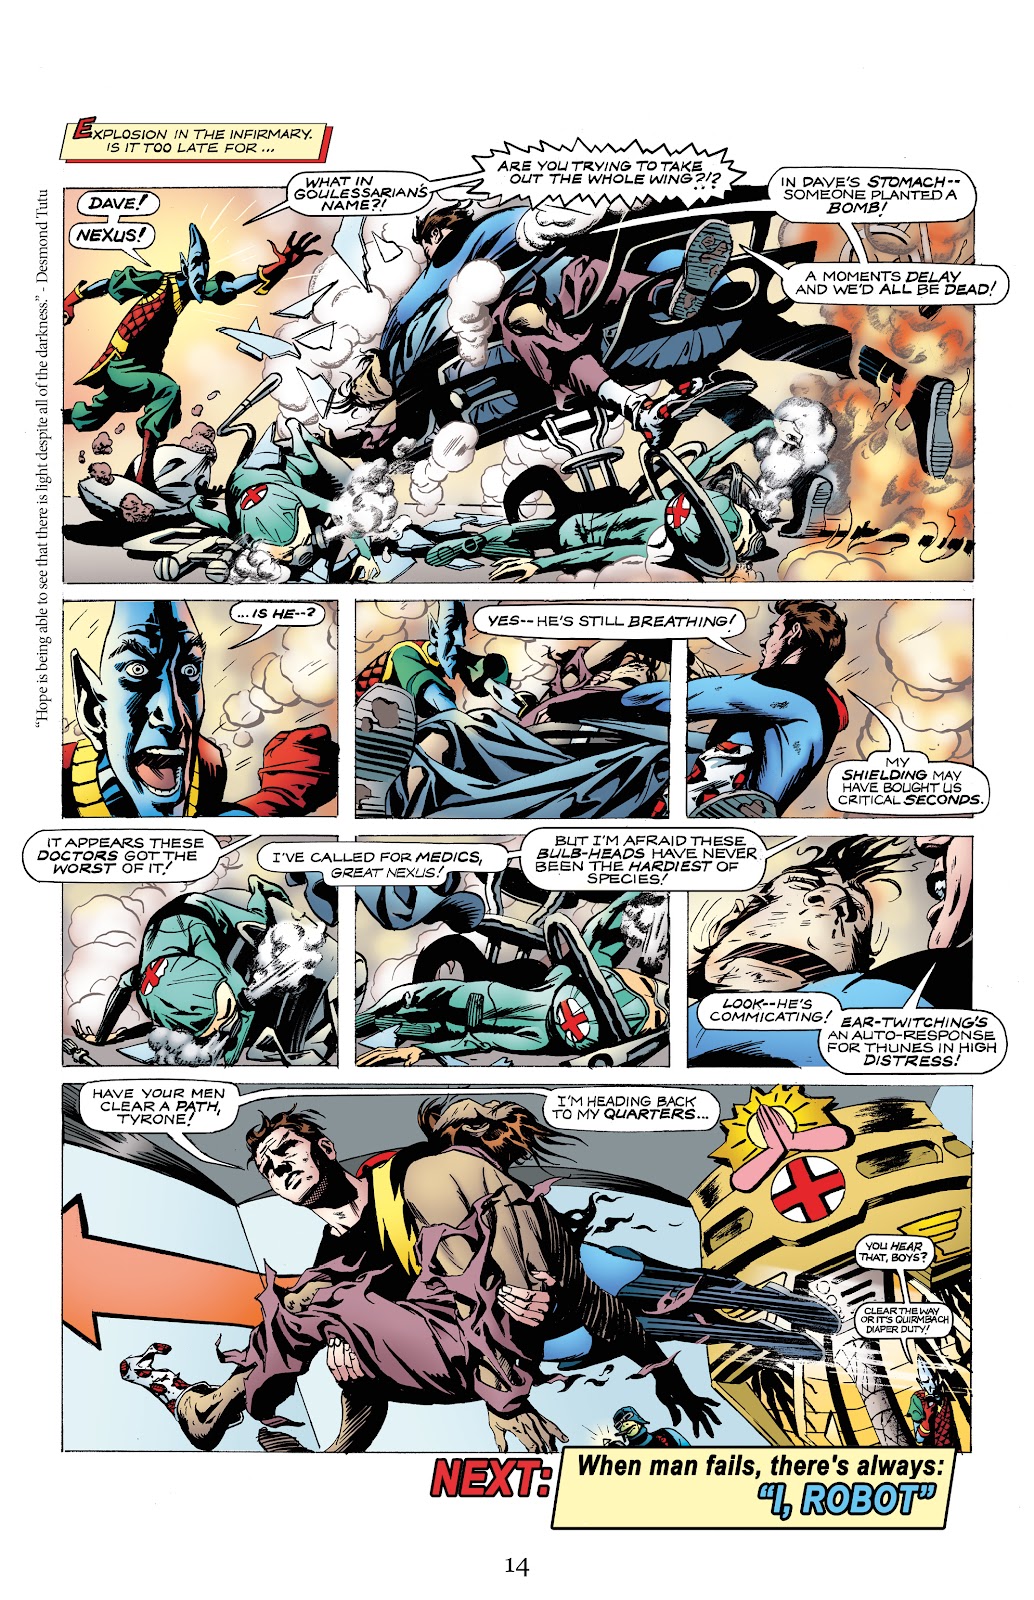 Nexus Newspaper Strips Vol 2: The Battle For Thuneworld issue 1 - Page 16